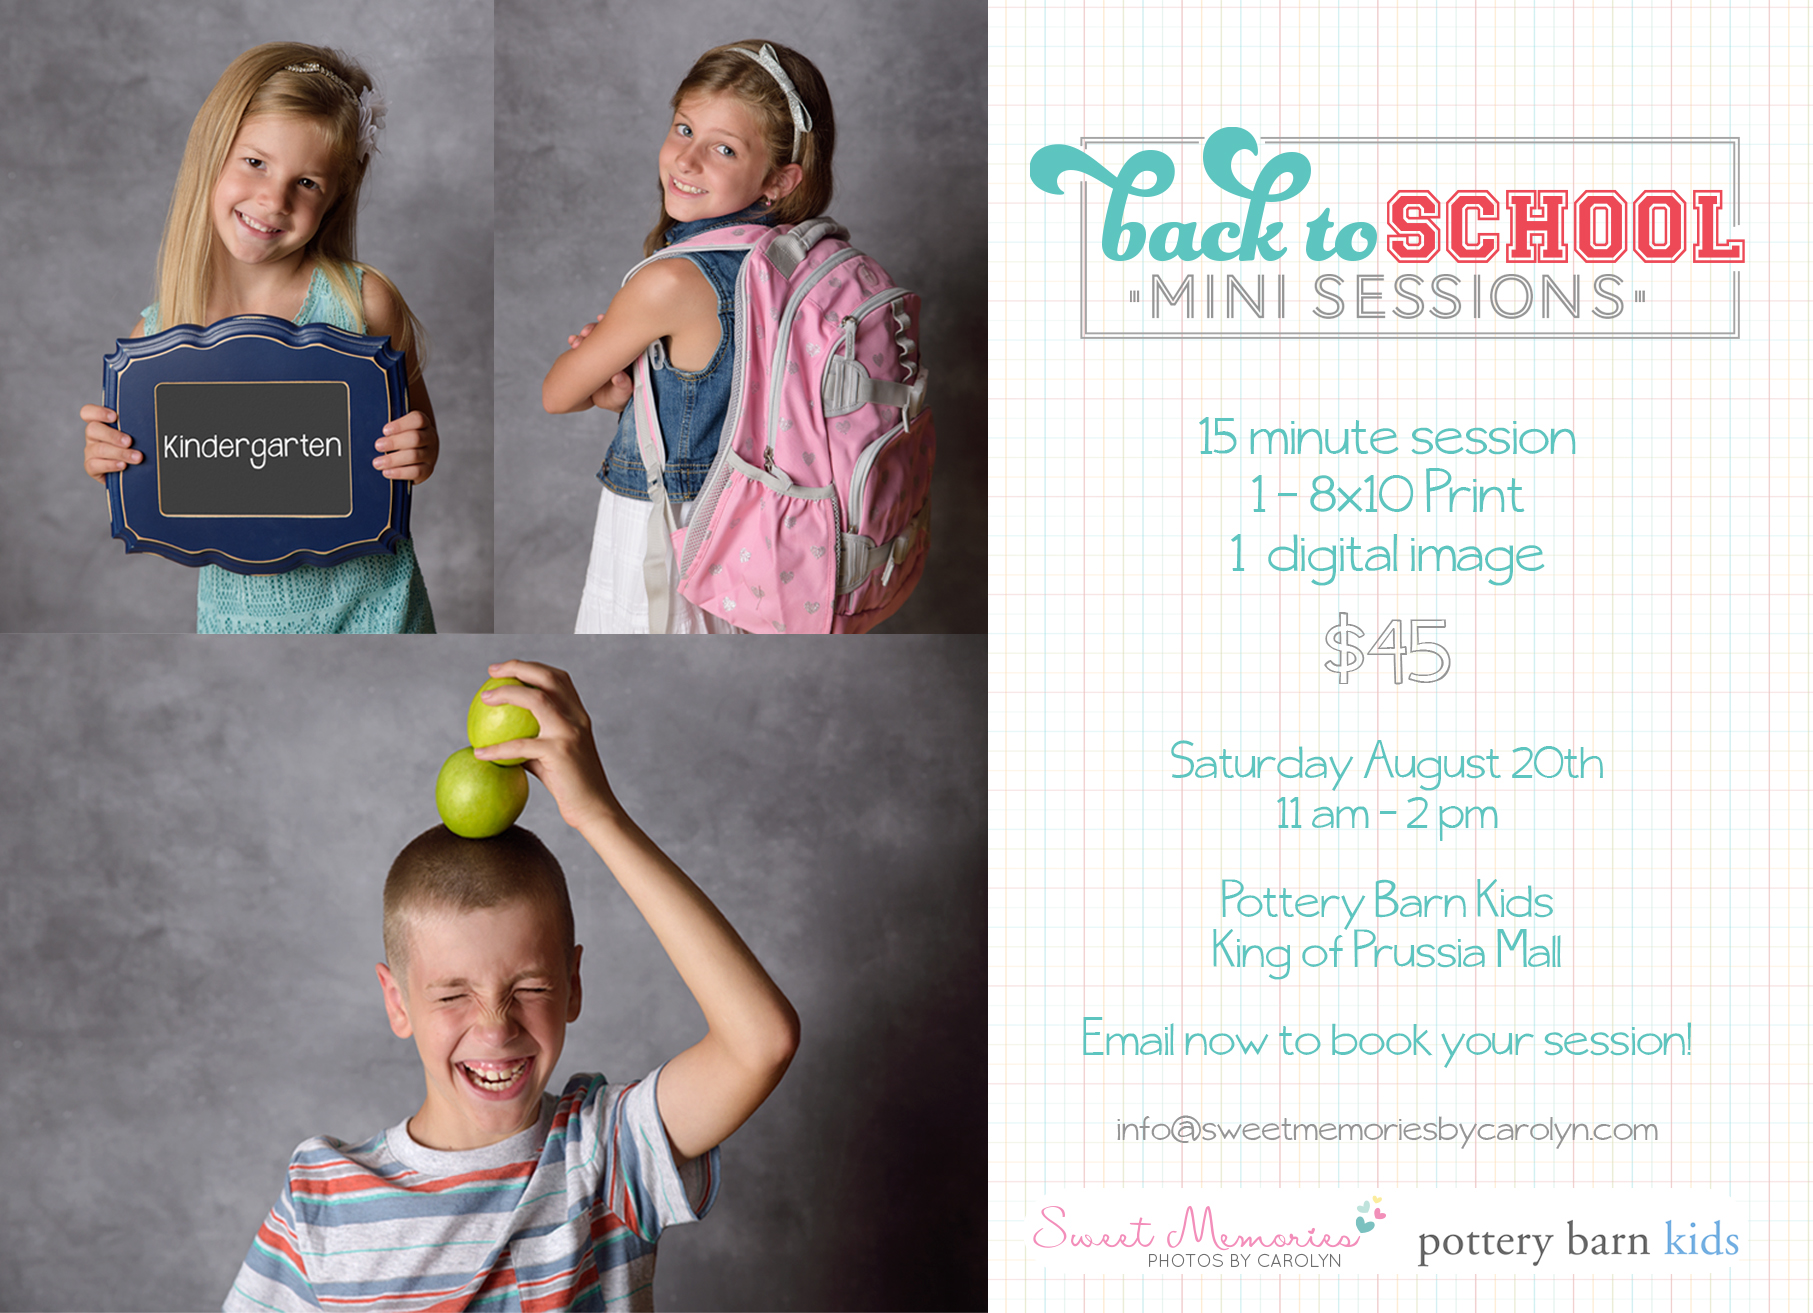 Back to School Photography Sessions at Pottery Barn Kids in King of Prussia PA